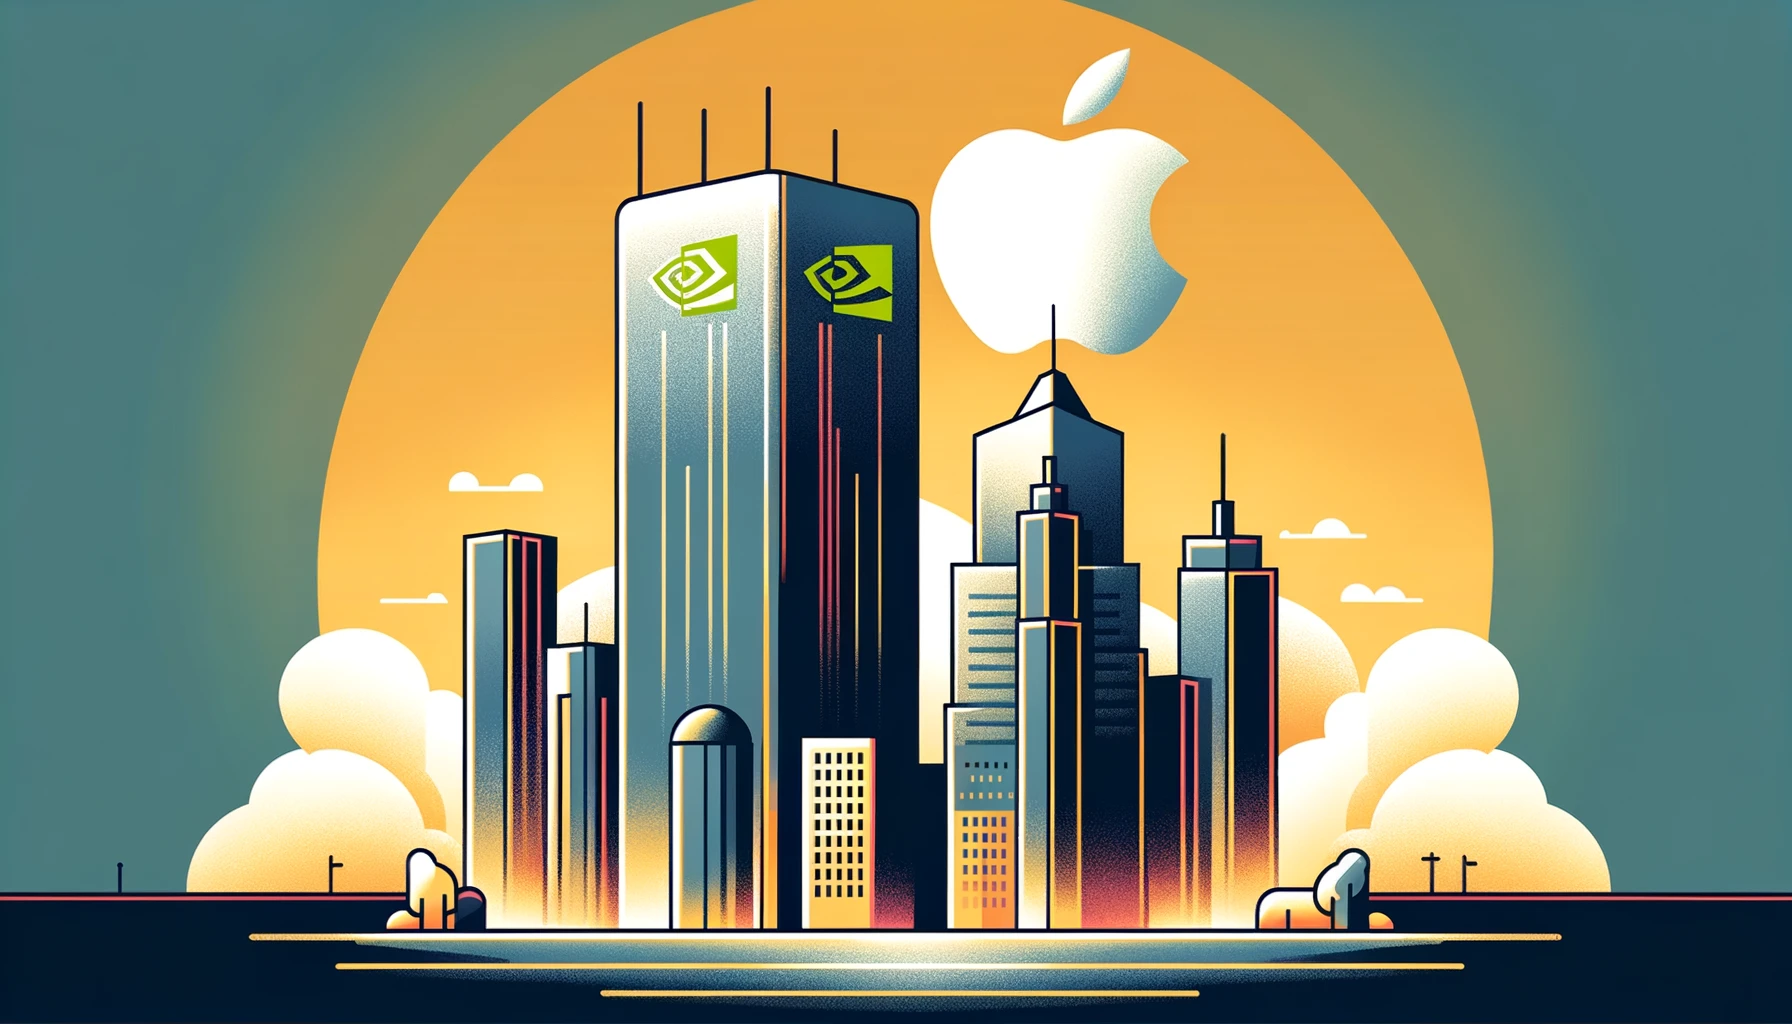 Nvidia is on the verge of surpassing Apple to become the second most valuable company.